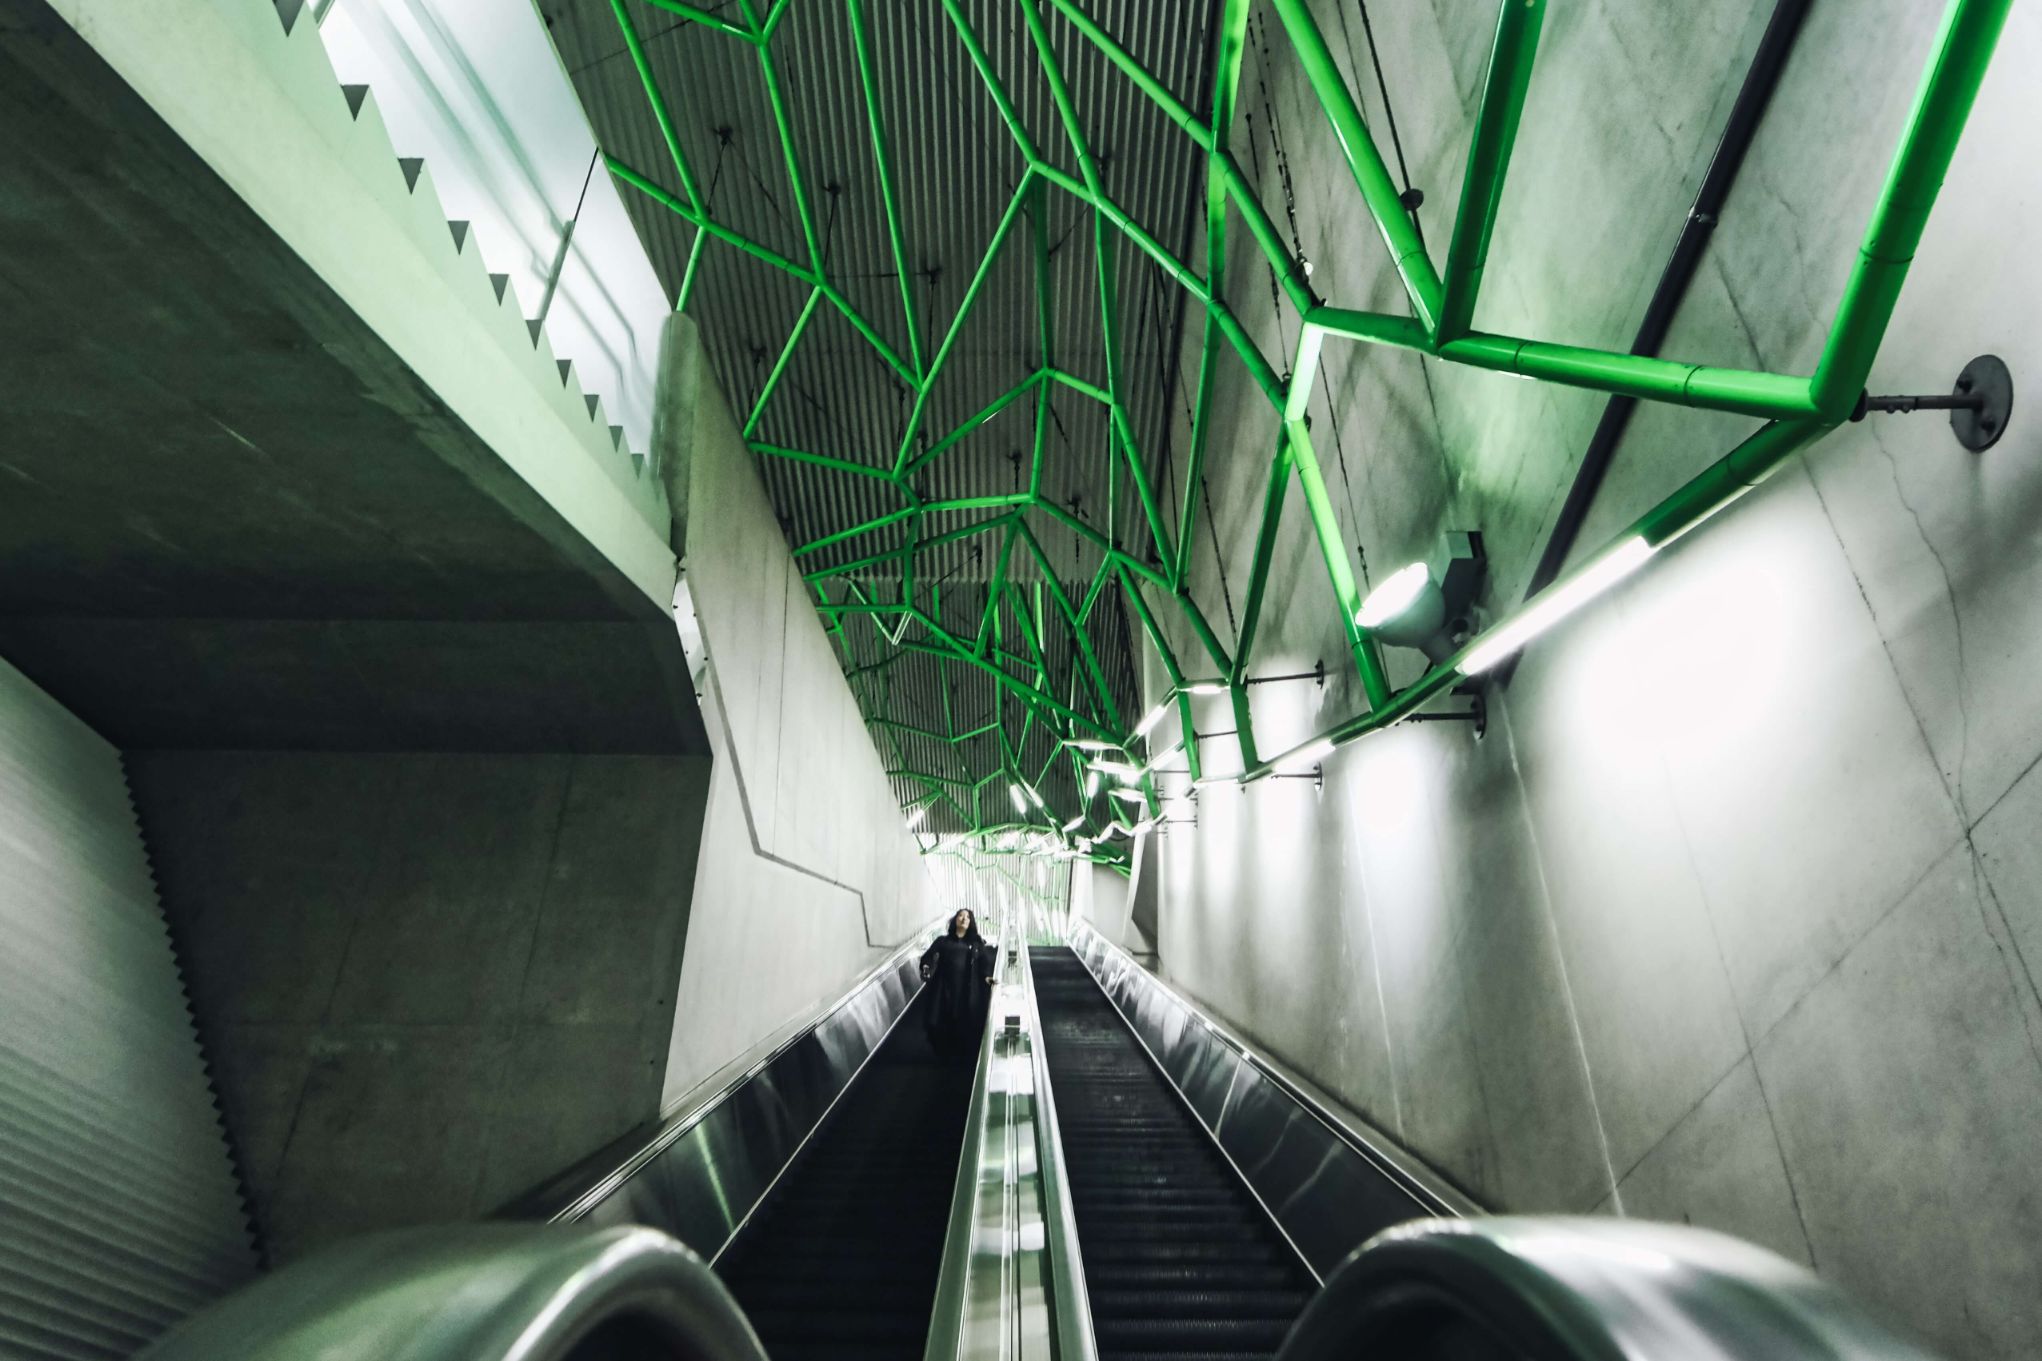 The green spider web like installation above the escalator is one of a kind in Tokyo. There are two installations like this on two escalators. Check both of them out first before spending too much time on one.